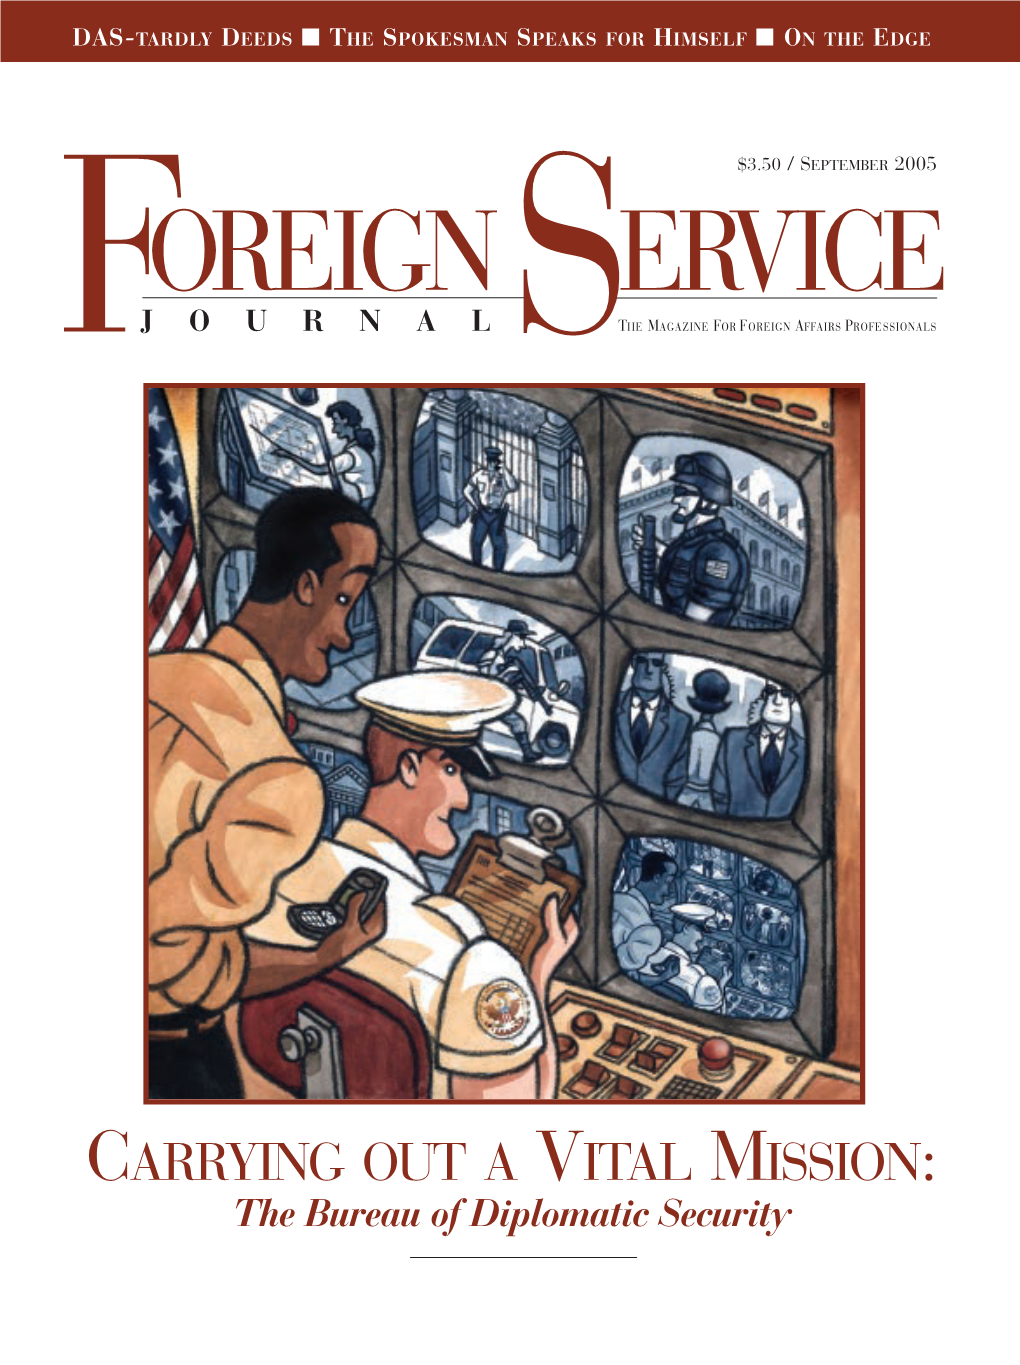 The Foreign Service Journal, September 2005